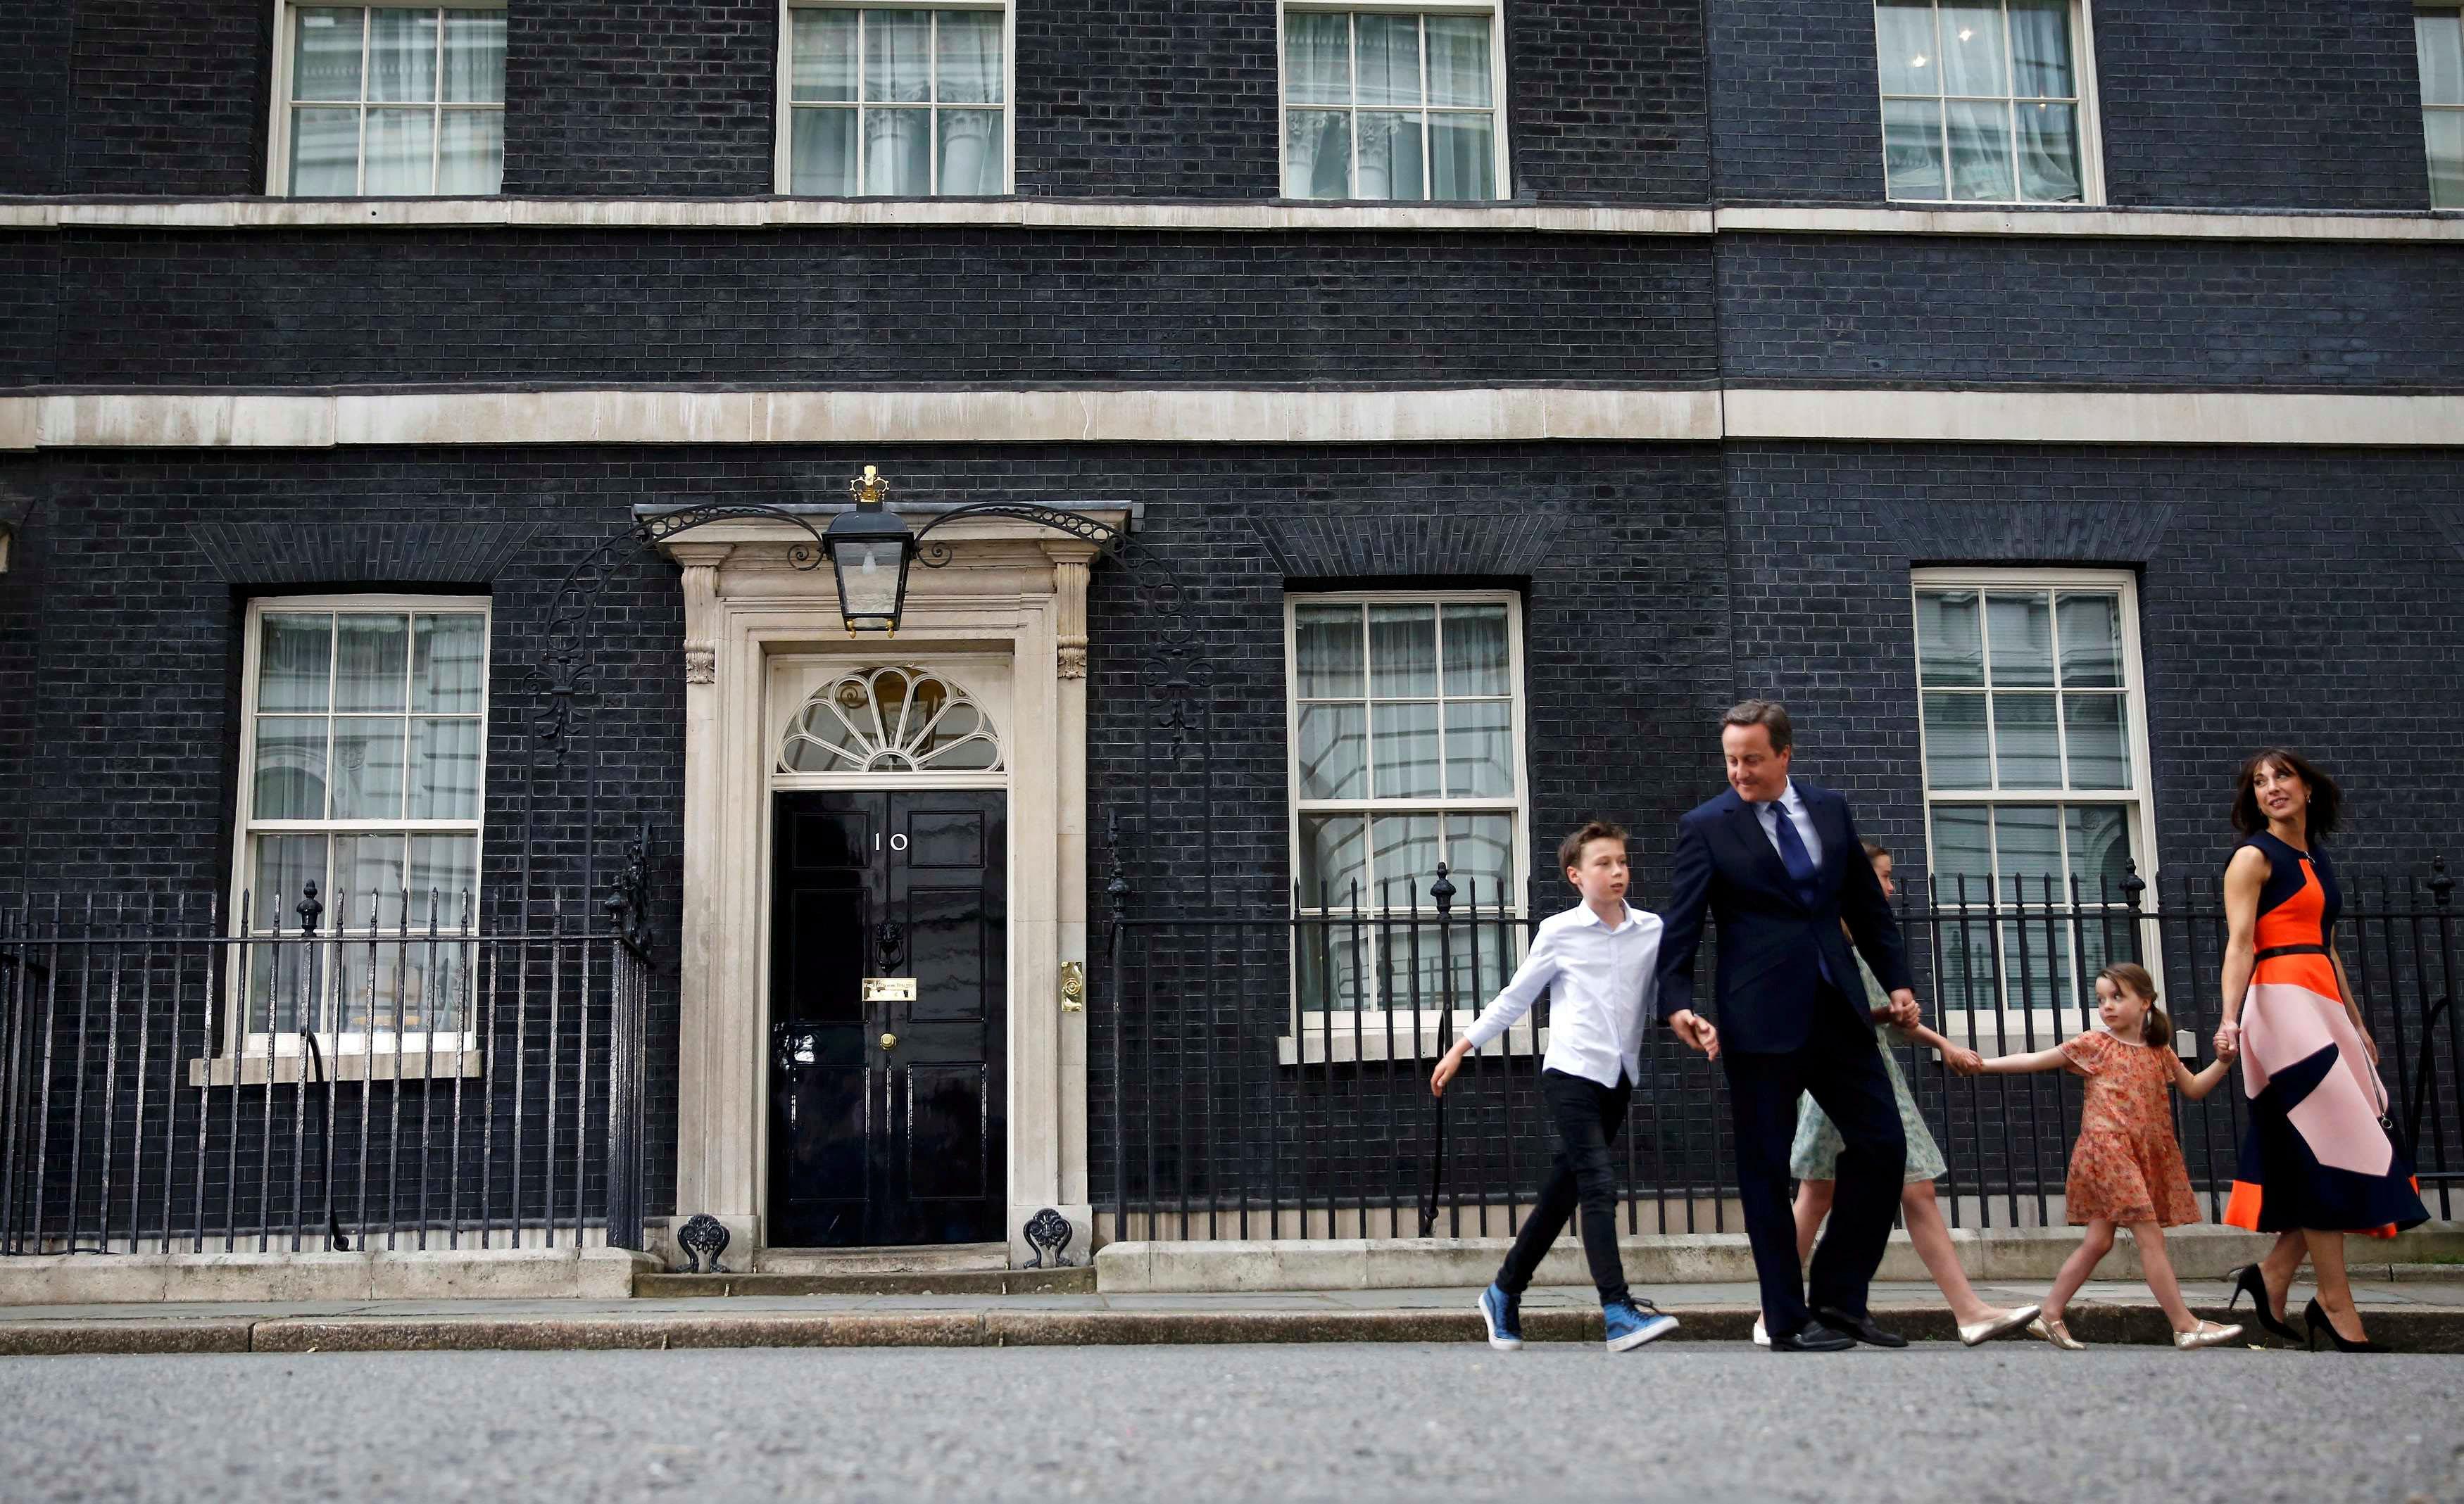 Britain's outgoing Prime Minister, David Cameron, leaves number 10 Downing Street, in central London